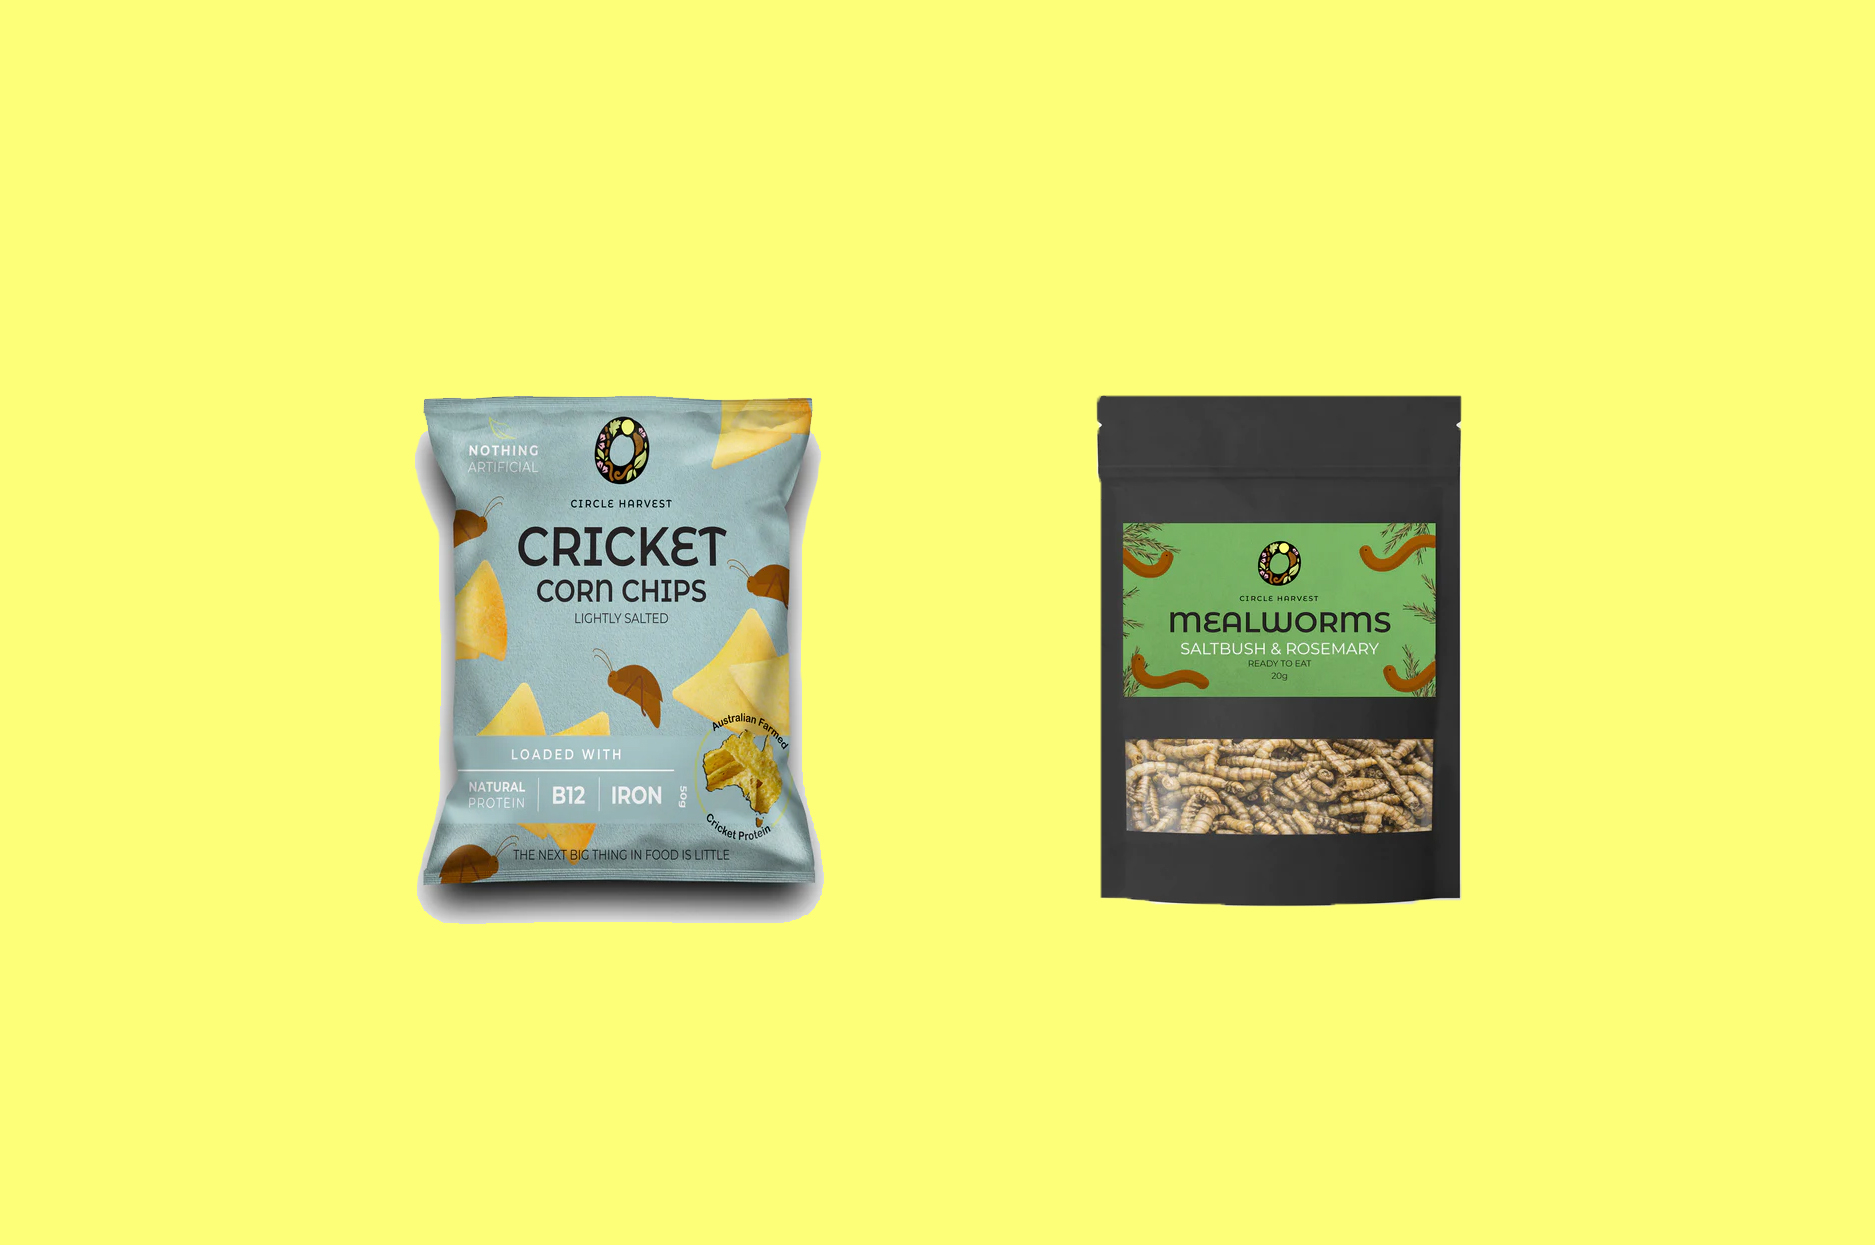 Cricket corn chips and mealworms